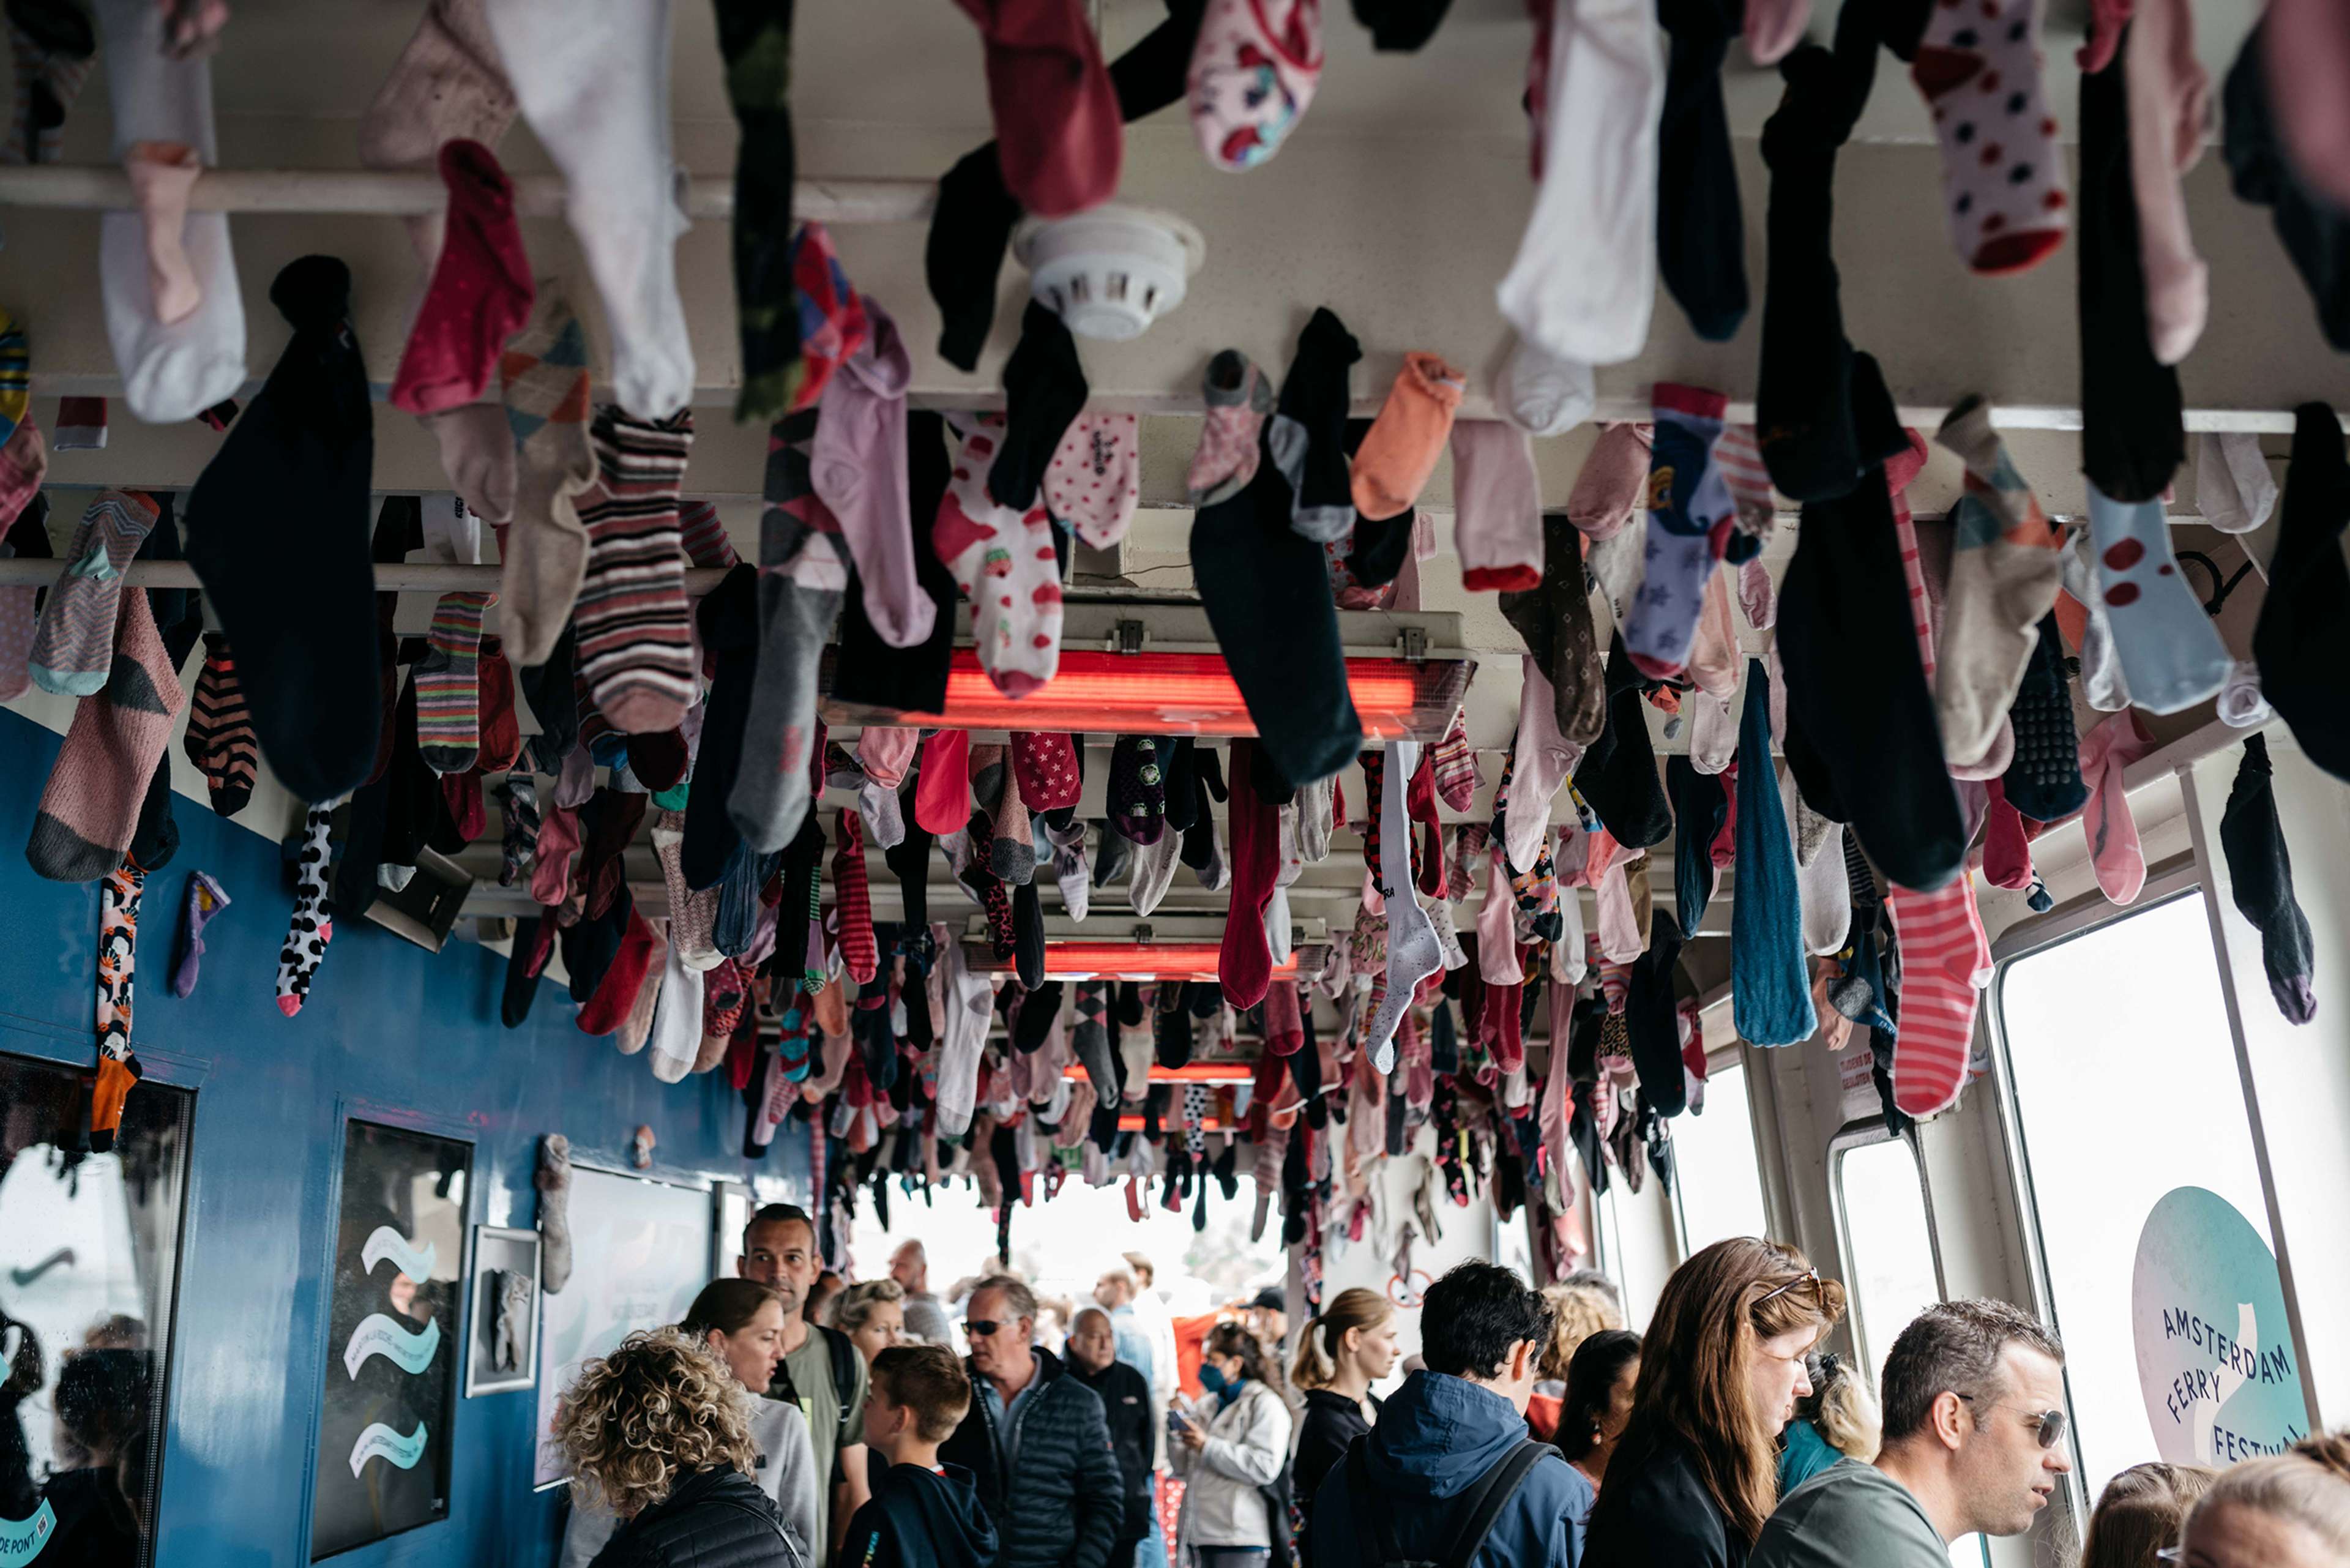 Installation of 2748 single socks for the Ferry Festival in Amsterdam. Curated by Inez Piso.